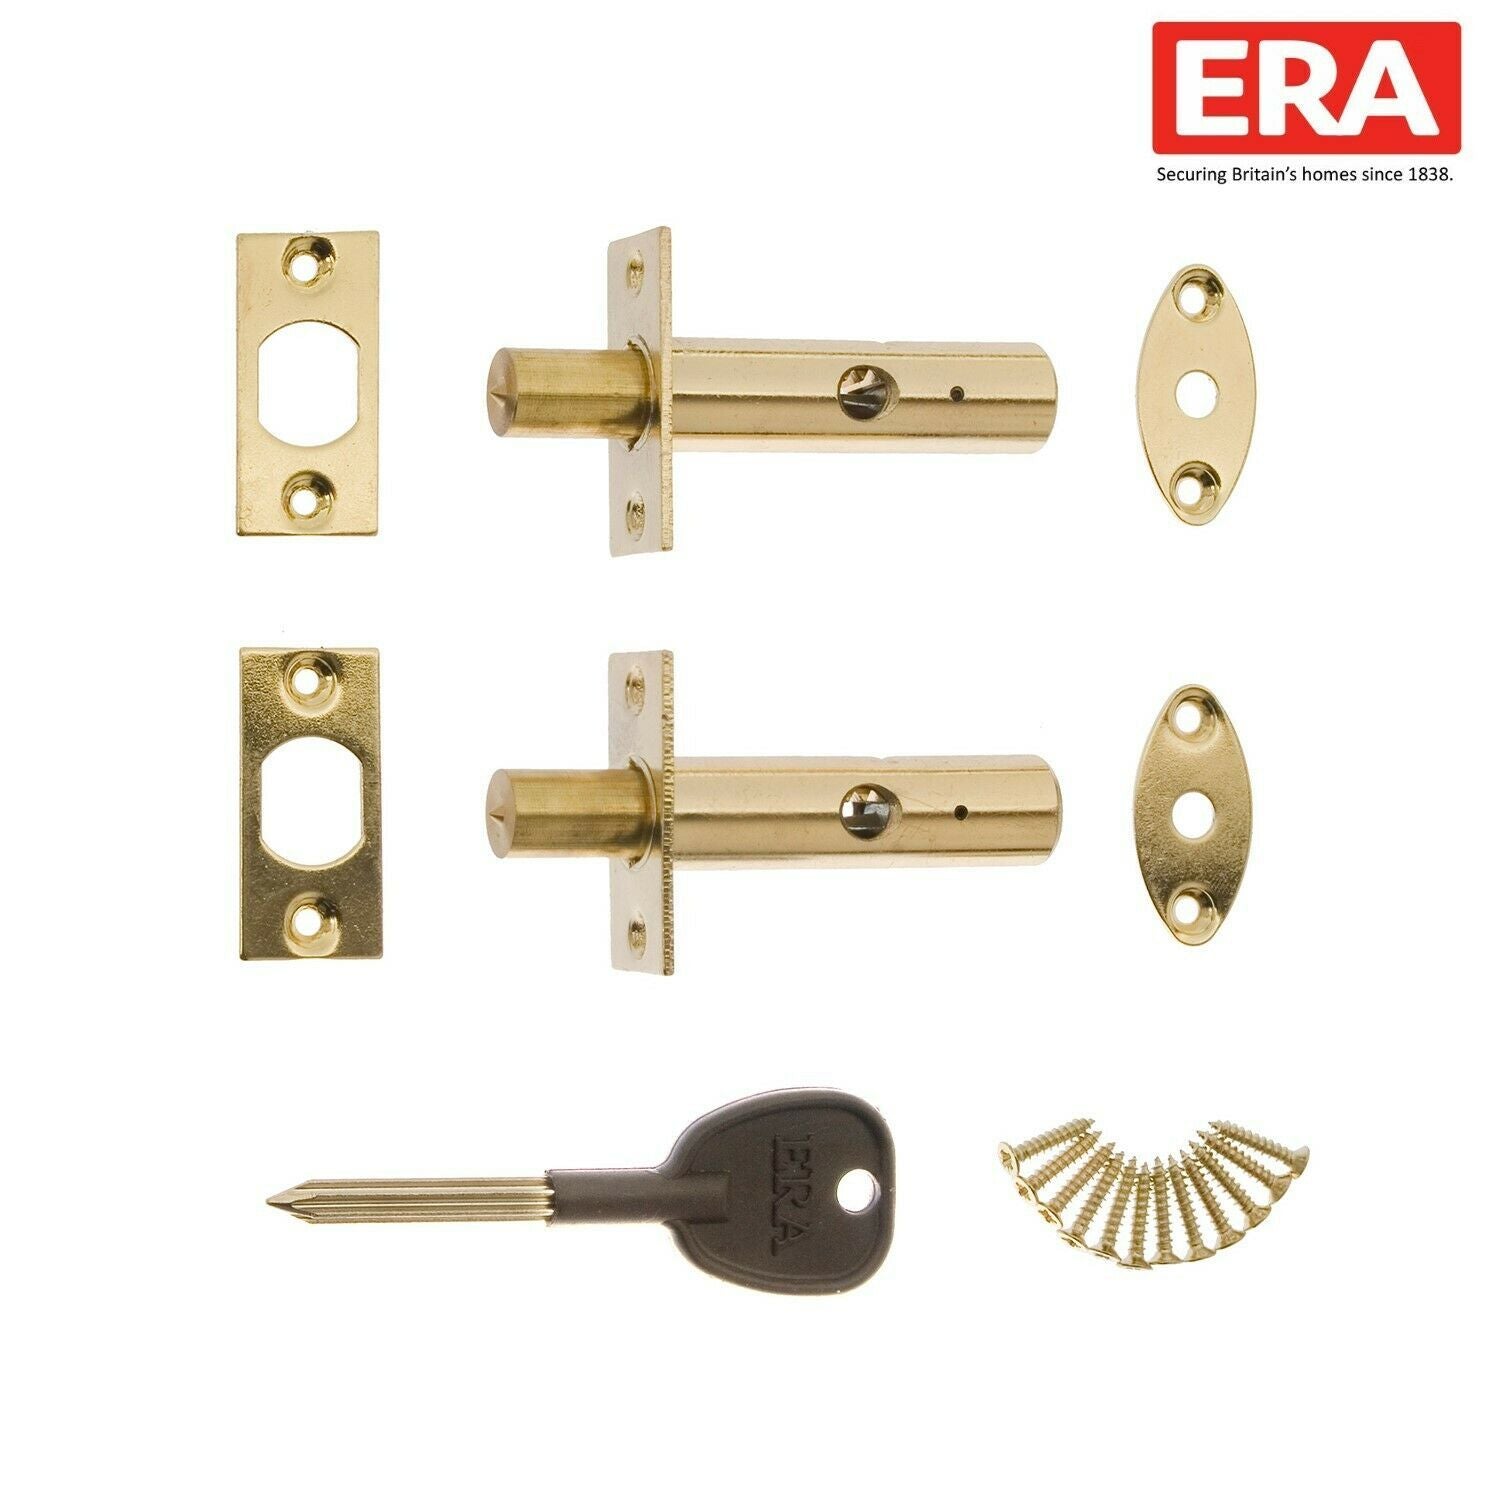 Bolts & Locks - Jim Lawrence - Security Bolts & Door Locks Hand-finished in  UK